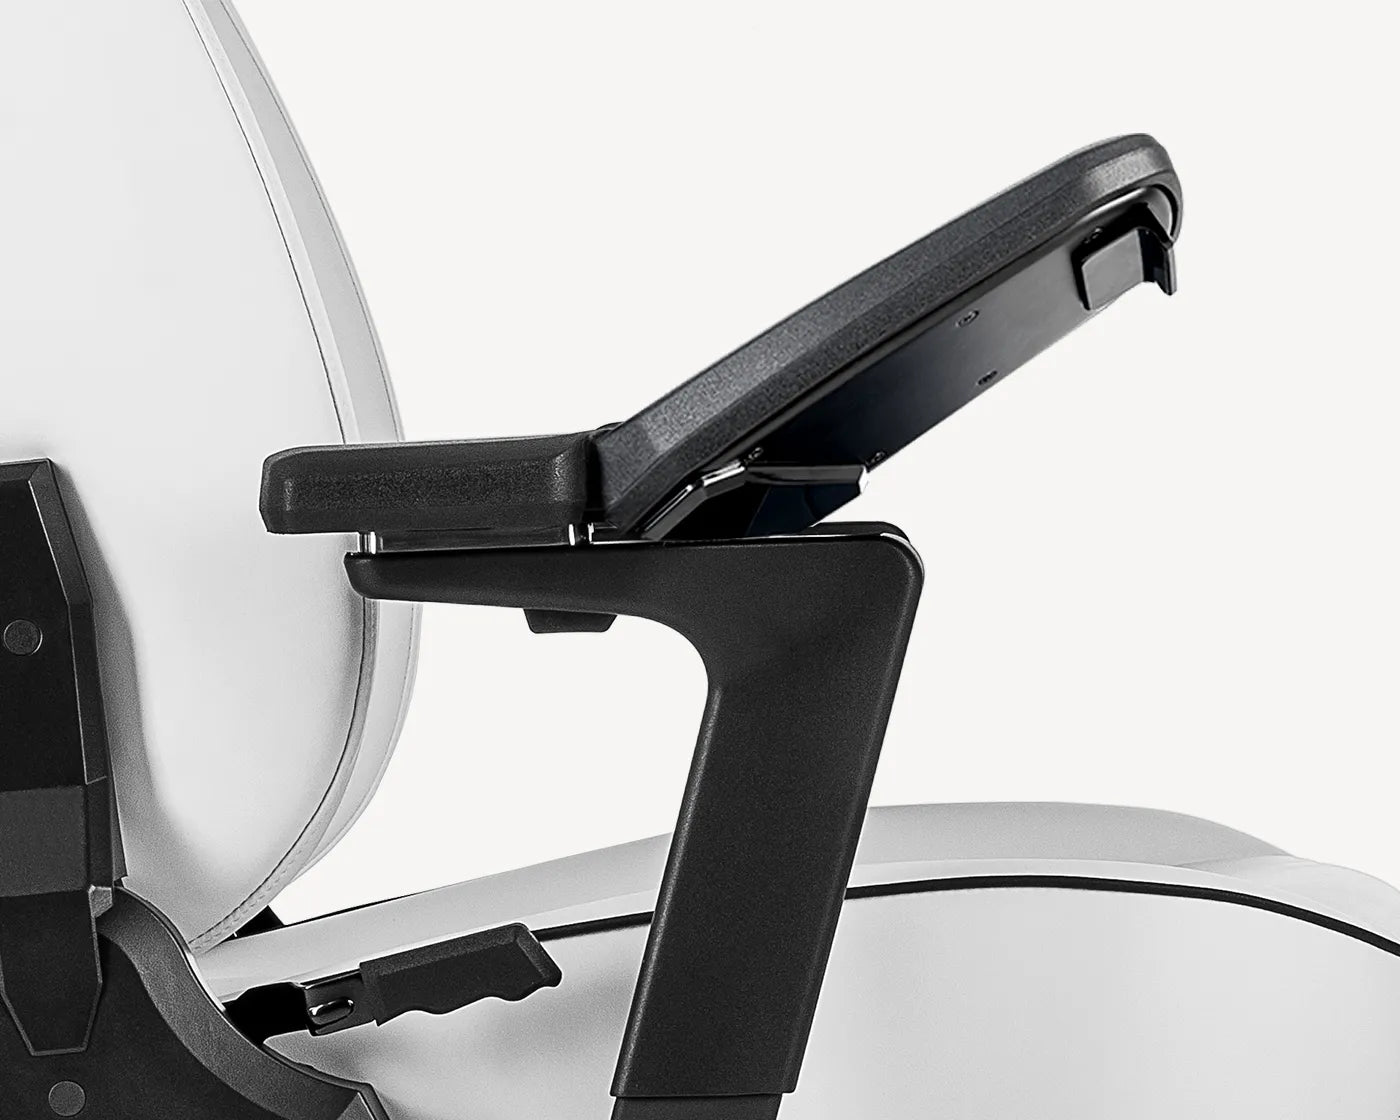 White ergonomic chair's 6D armrest with multiple adjustment features highlighted.